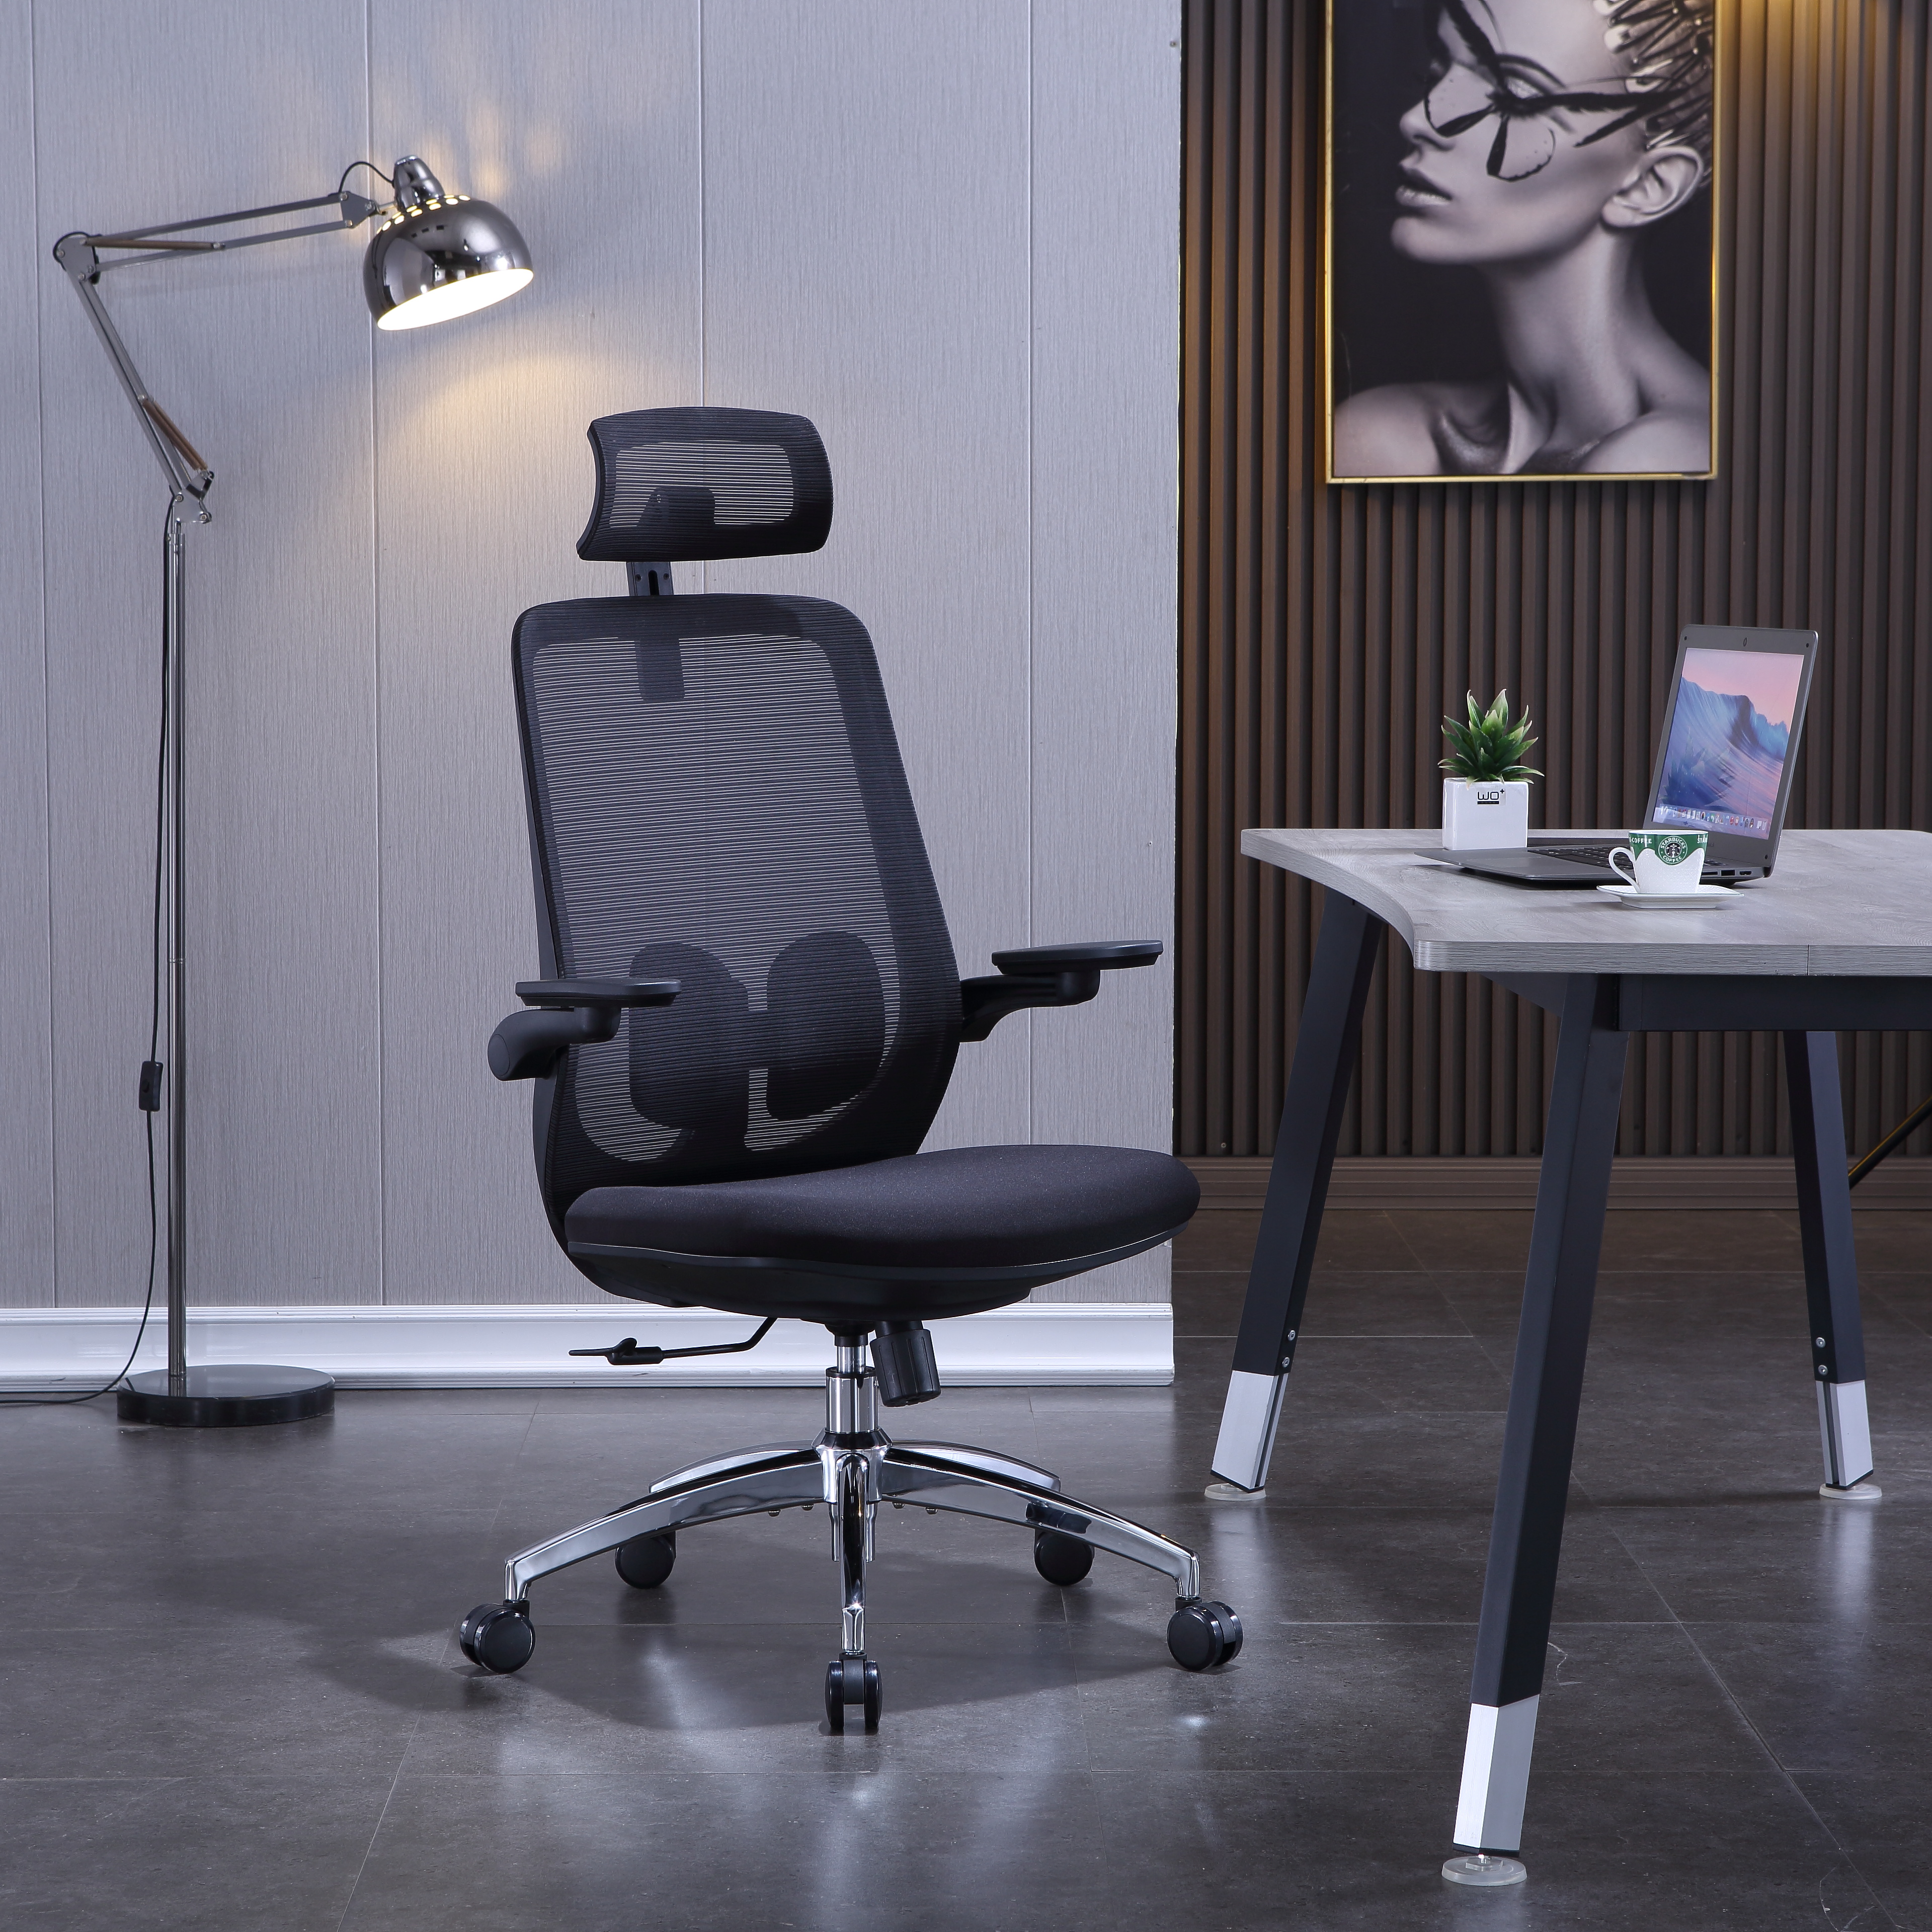 Ergonomic office chair introduction show _Beleyo furniture